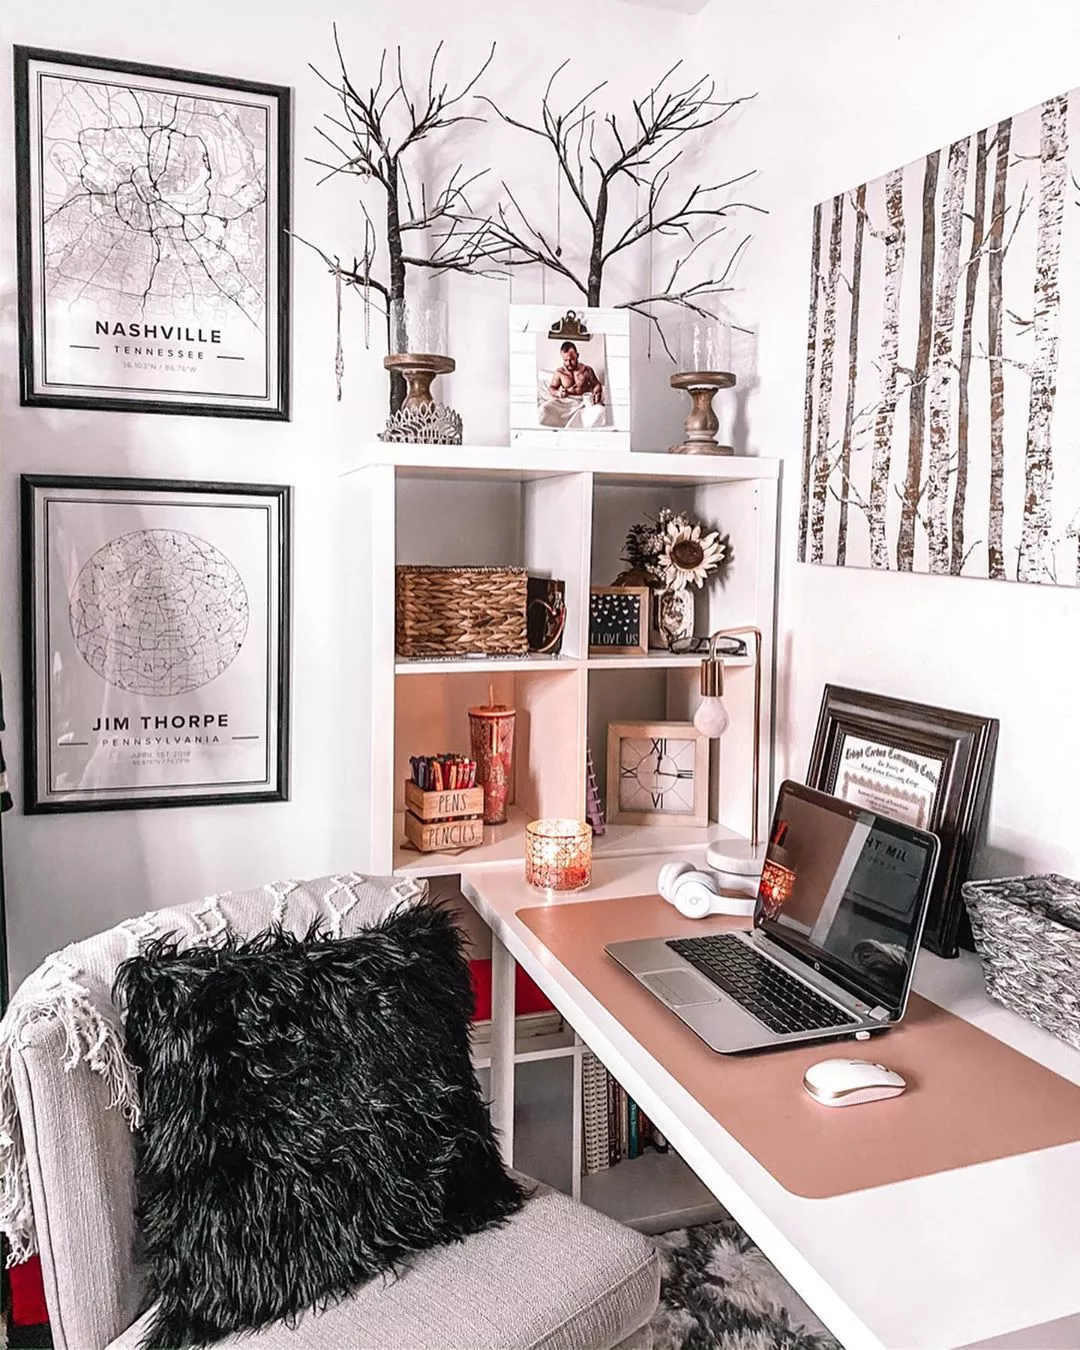 Small home office inspiration  Small home offices, Small home office, Home  office space